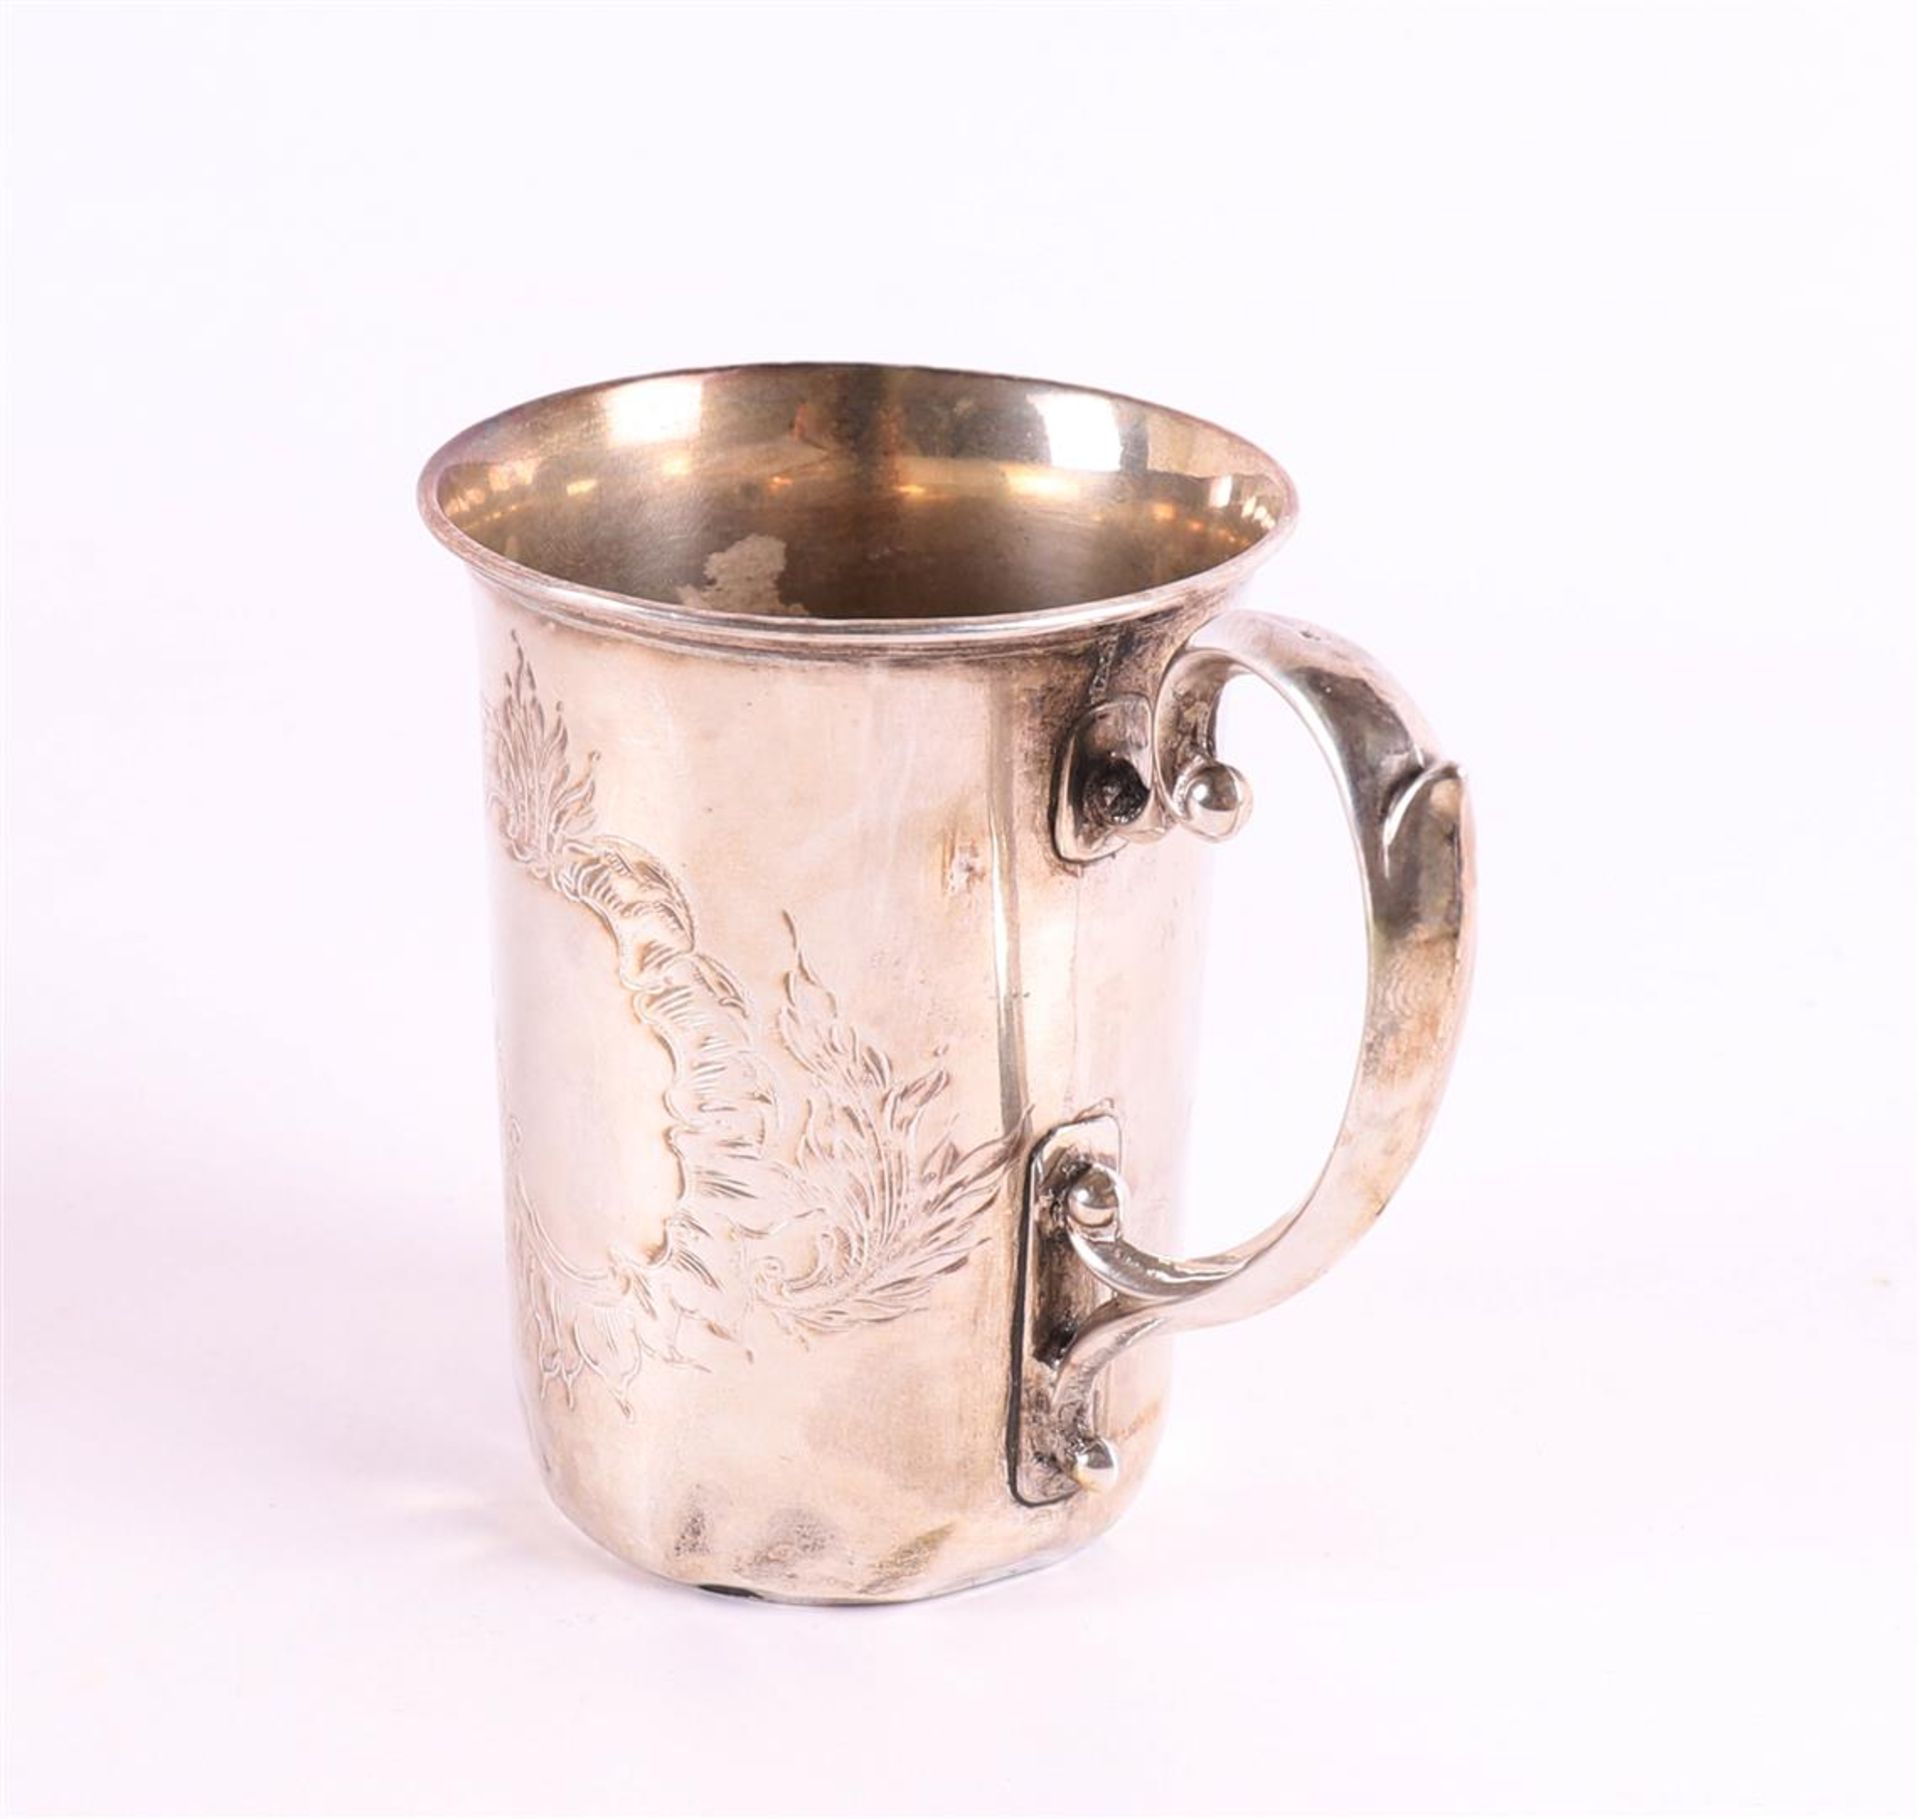 A 3rd grade 800/1000 silver cup on handle, around 1900 (dented), h 7.7 cm, 49 grams. - Image 4 of 5